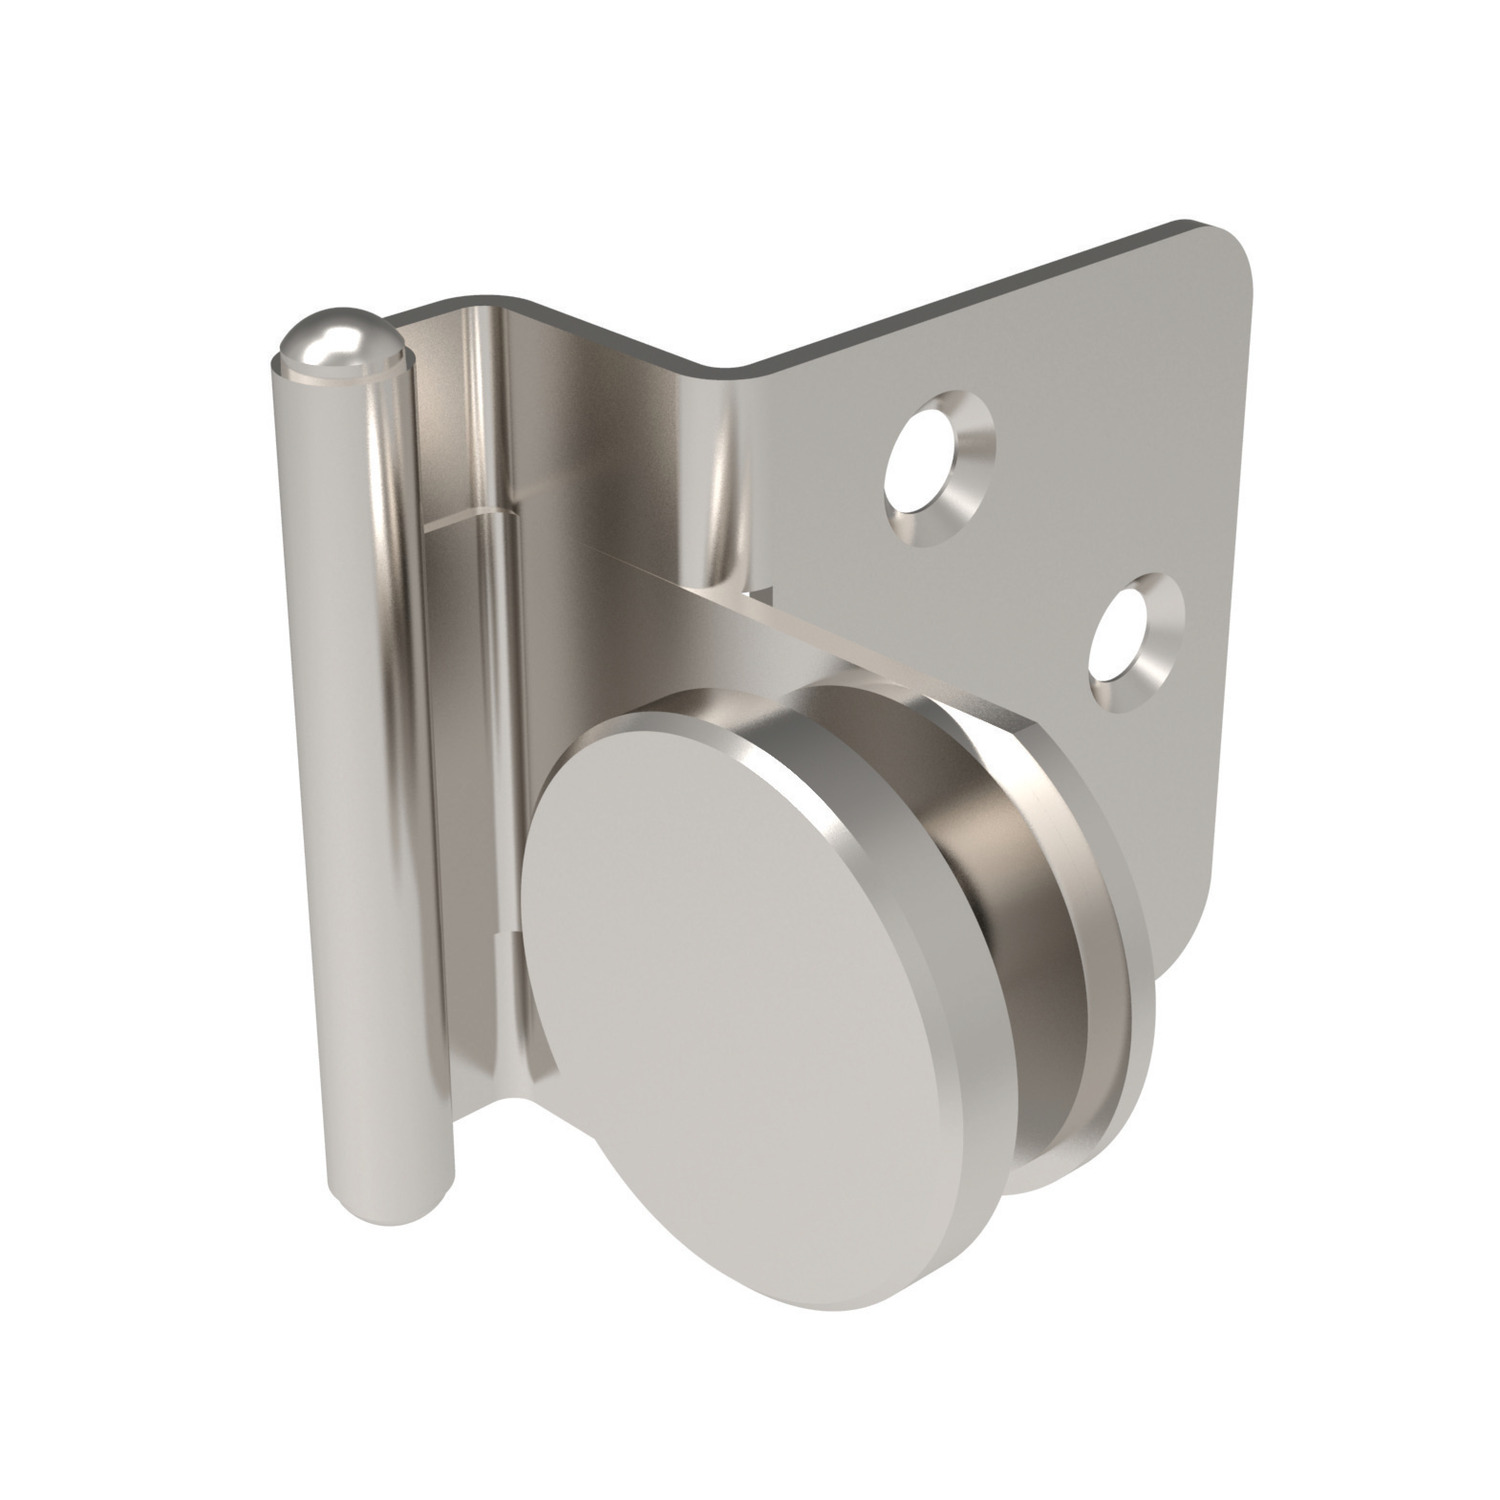 T2020.AC0010 Glass Door Hinges - Half Overlay Type Stainless steel - Glass thickness 4 to 6mm. Load capacity 2 hinges 4kg